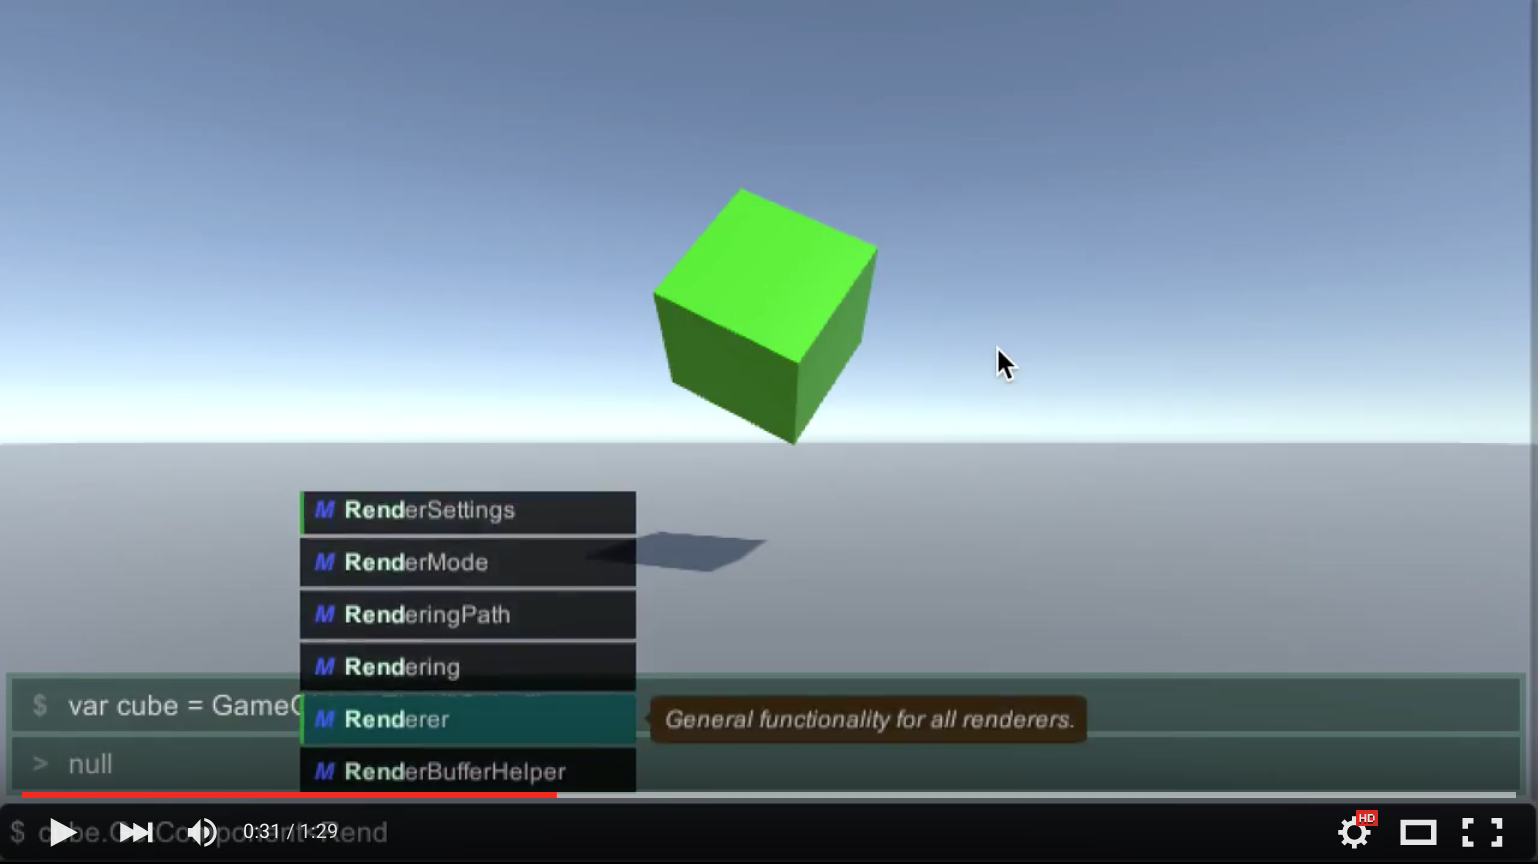 uREPL - In-game powerful REPL environment for Unity3D - YouTube